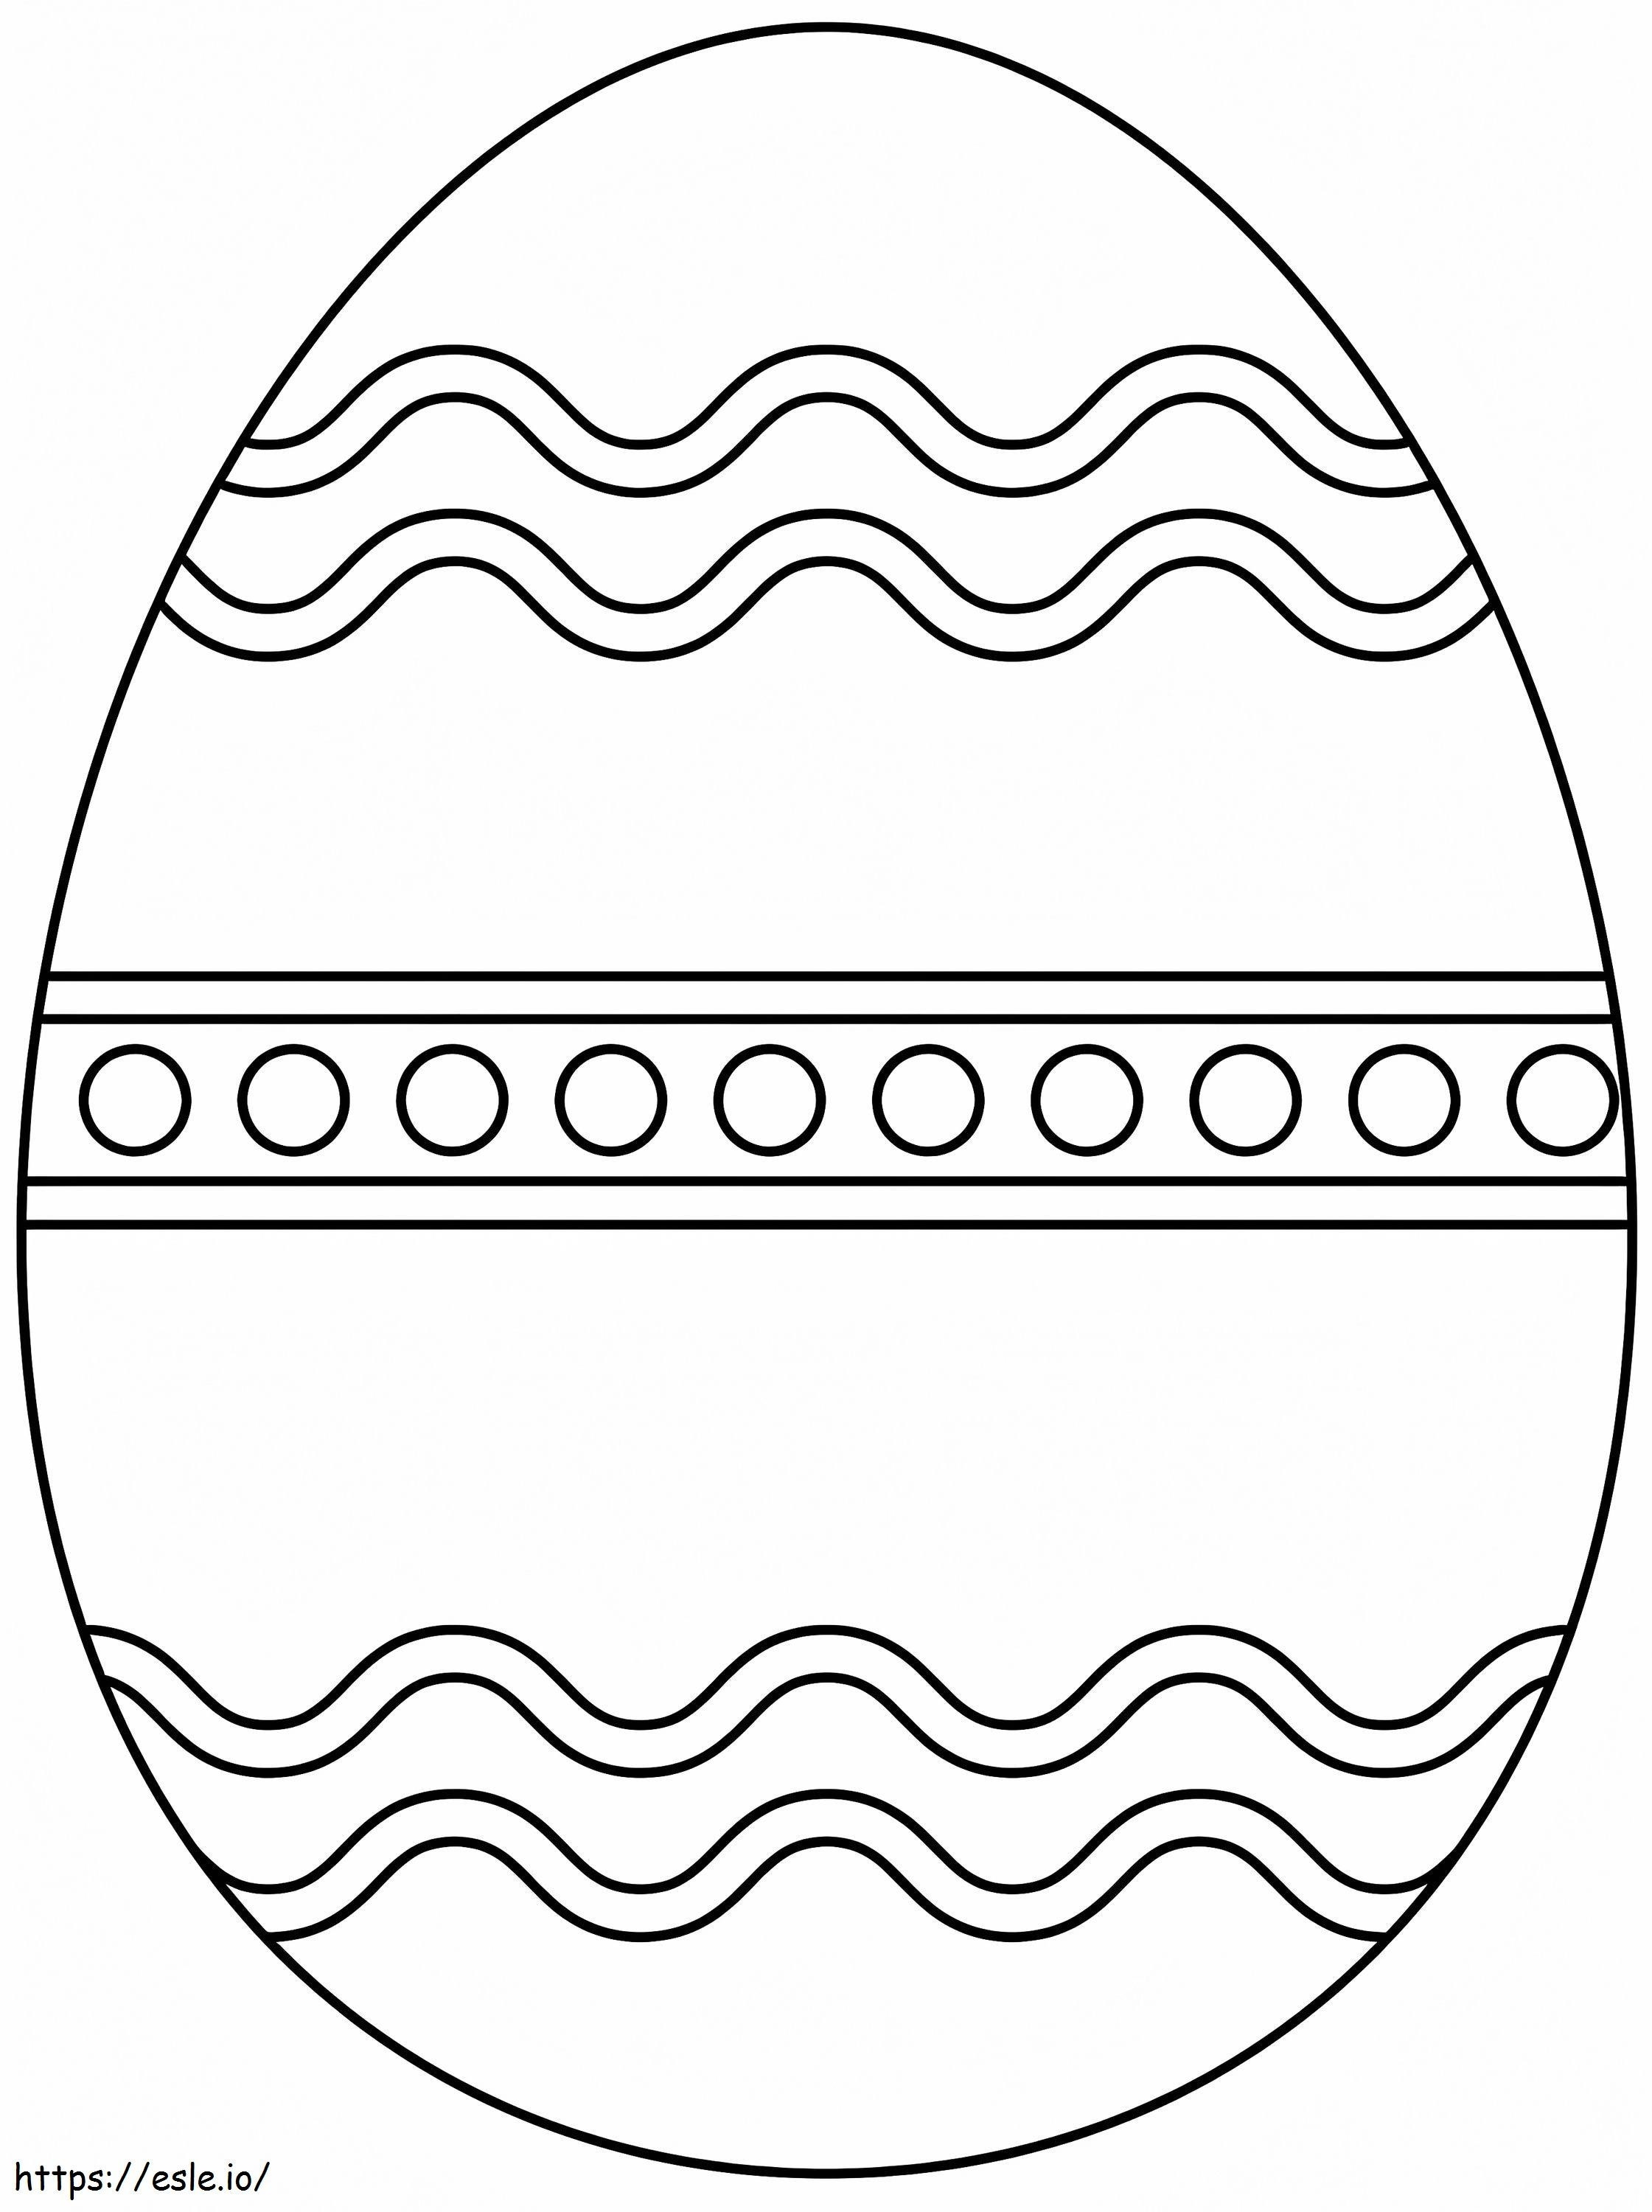 Cute Easter Egg 6 coloring page